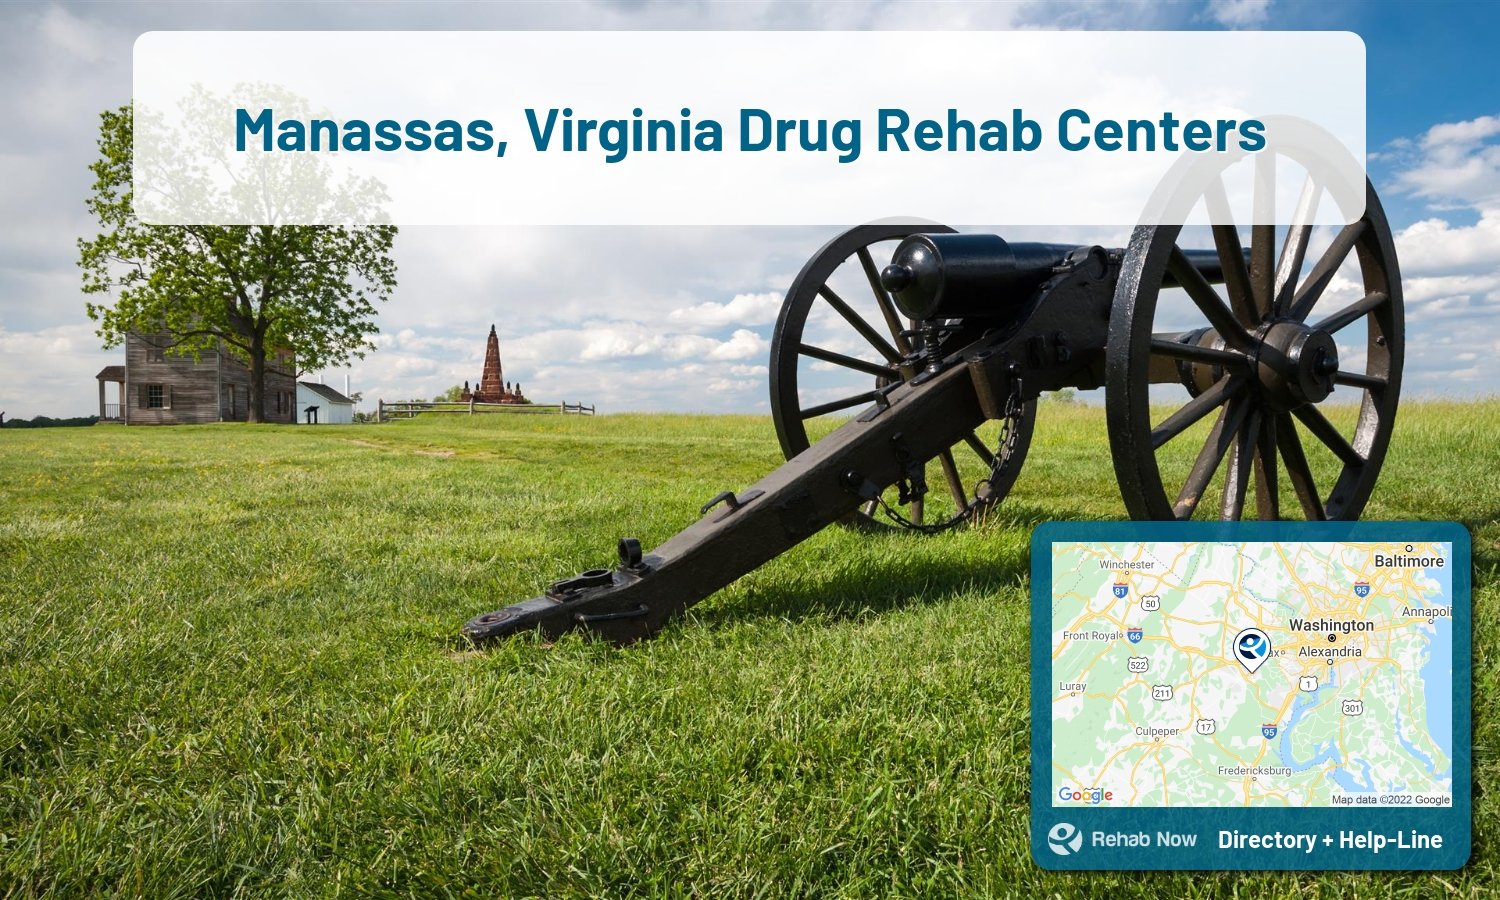 Let our expert counselors help find the best addiction treatment in Manassas, Virginia now with a free call to our hotline.